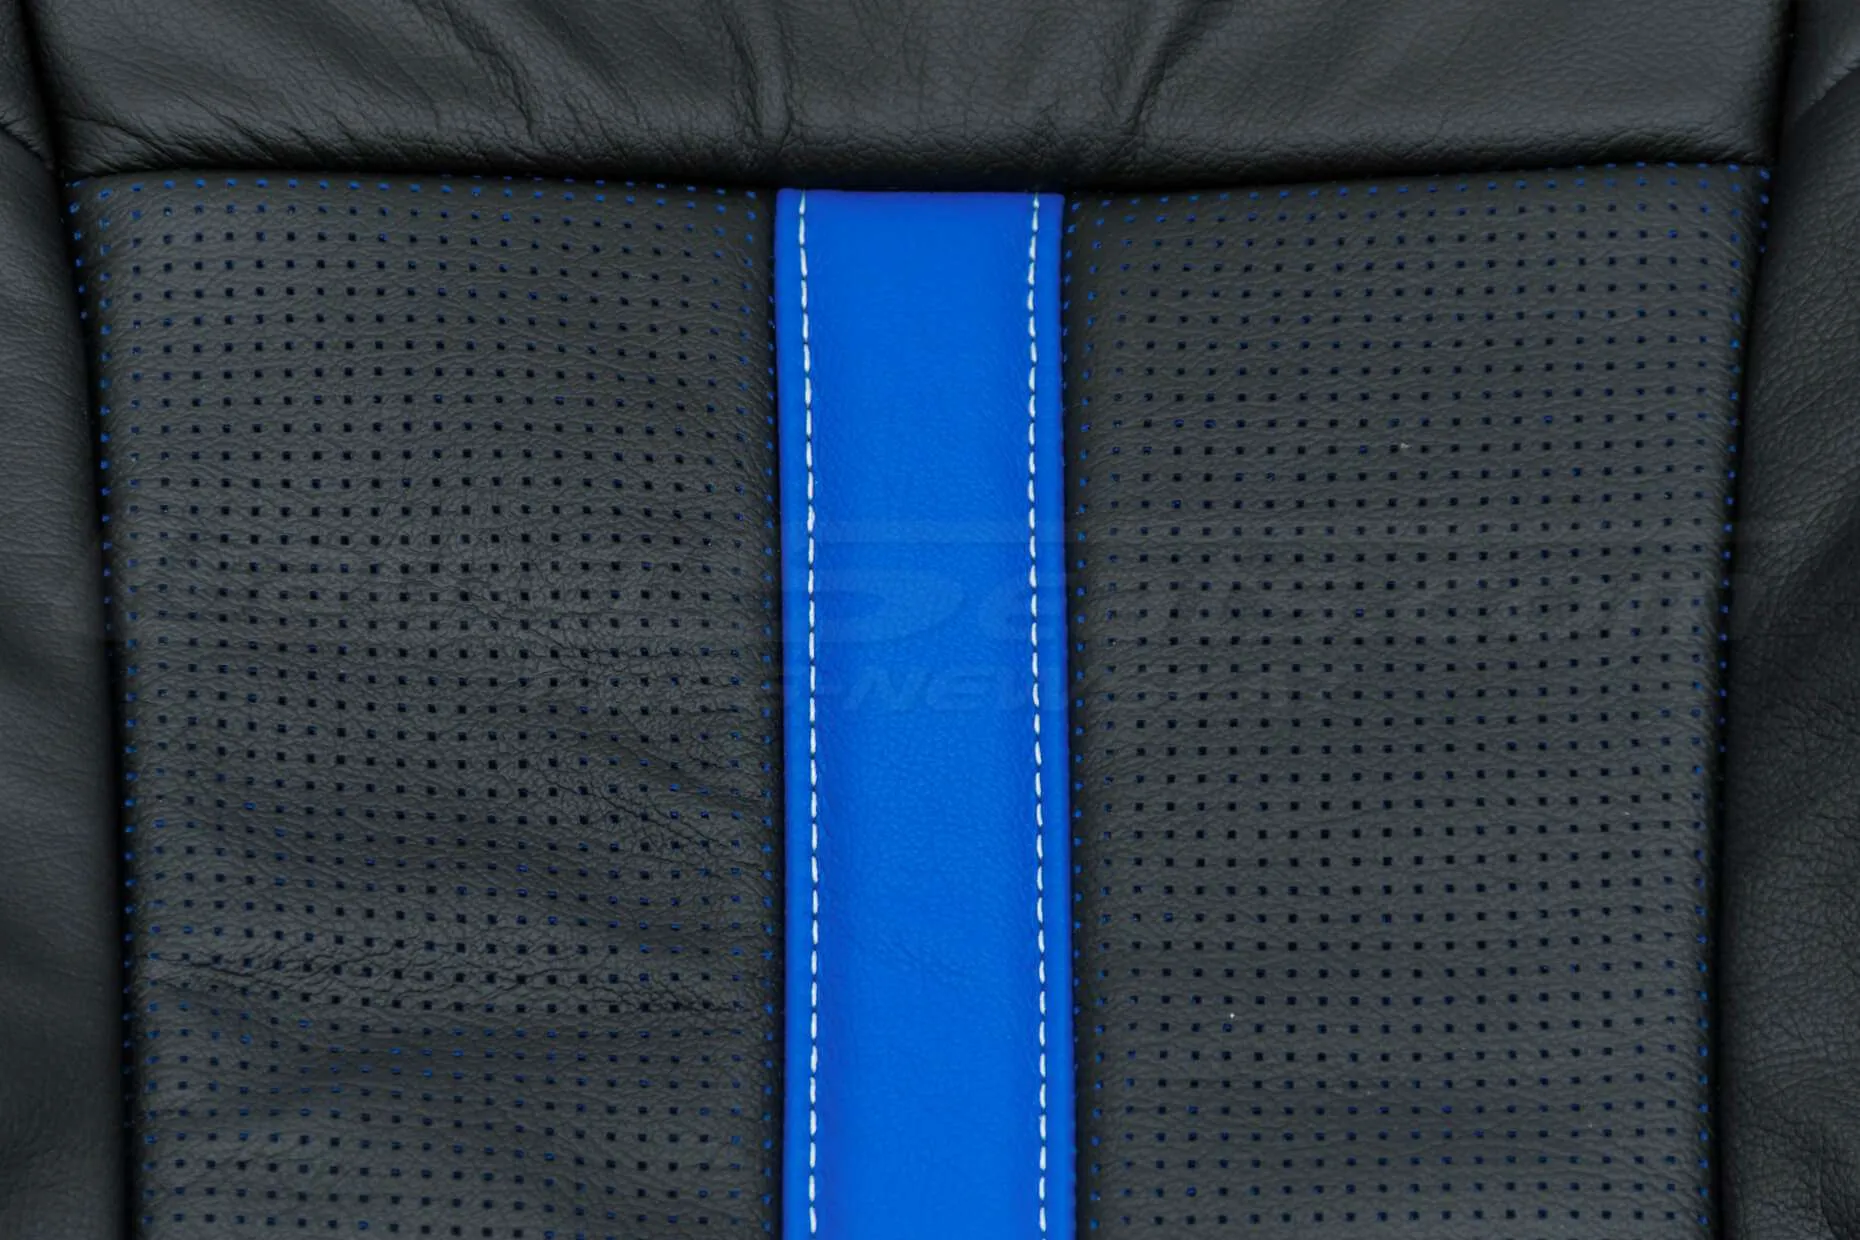 Ford F-150 Upholstery Kit - Installed - Black & Piazza Blue - Piazza Perforation close-up